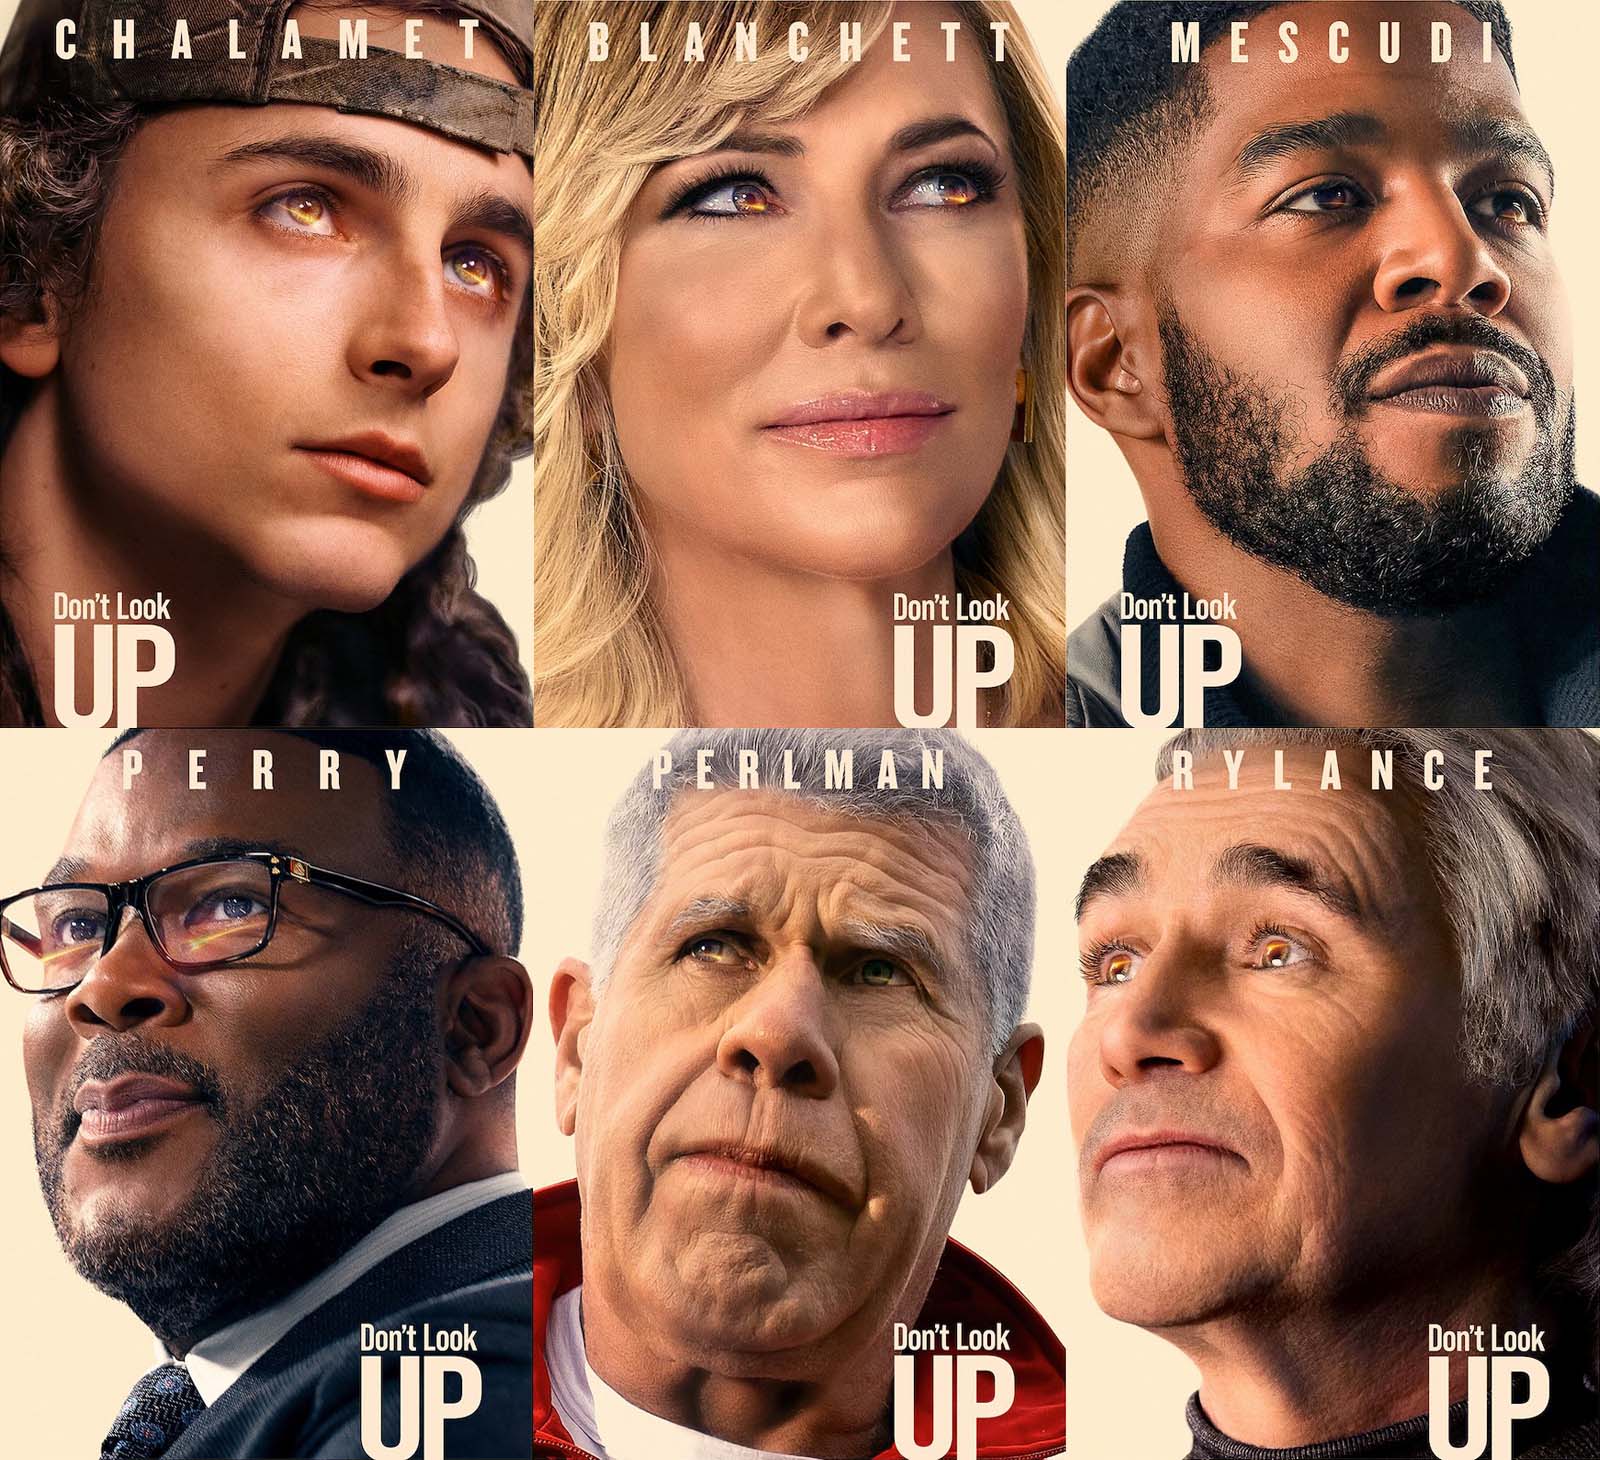 More of Don’t Look Up’s lineup. Image © Netflix